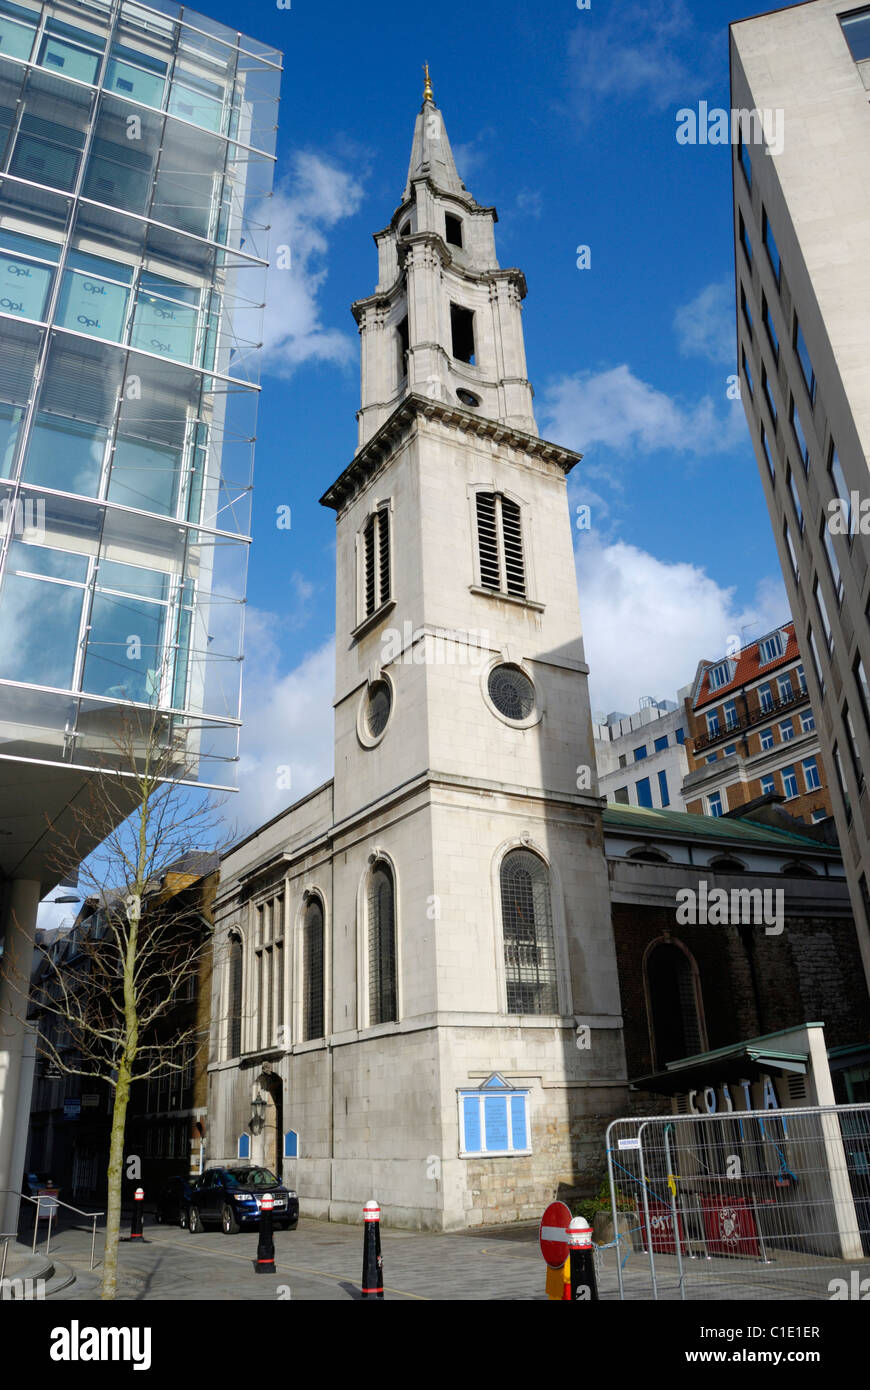 Saint Vedast-alias-Foster church in Foster Lane in the City of London, England Stock Photo